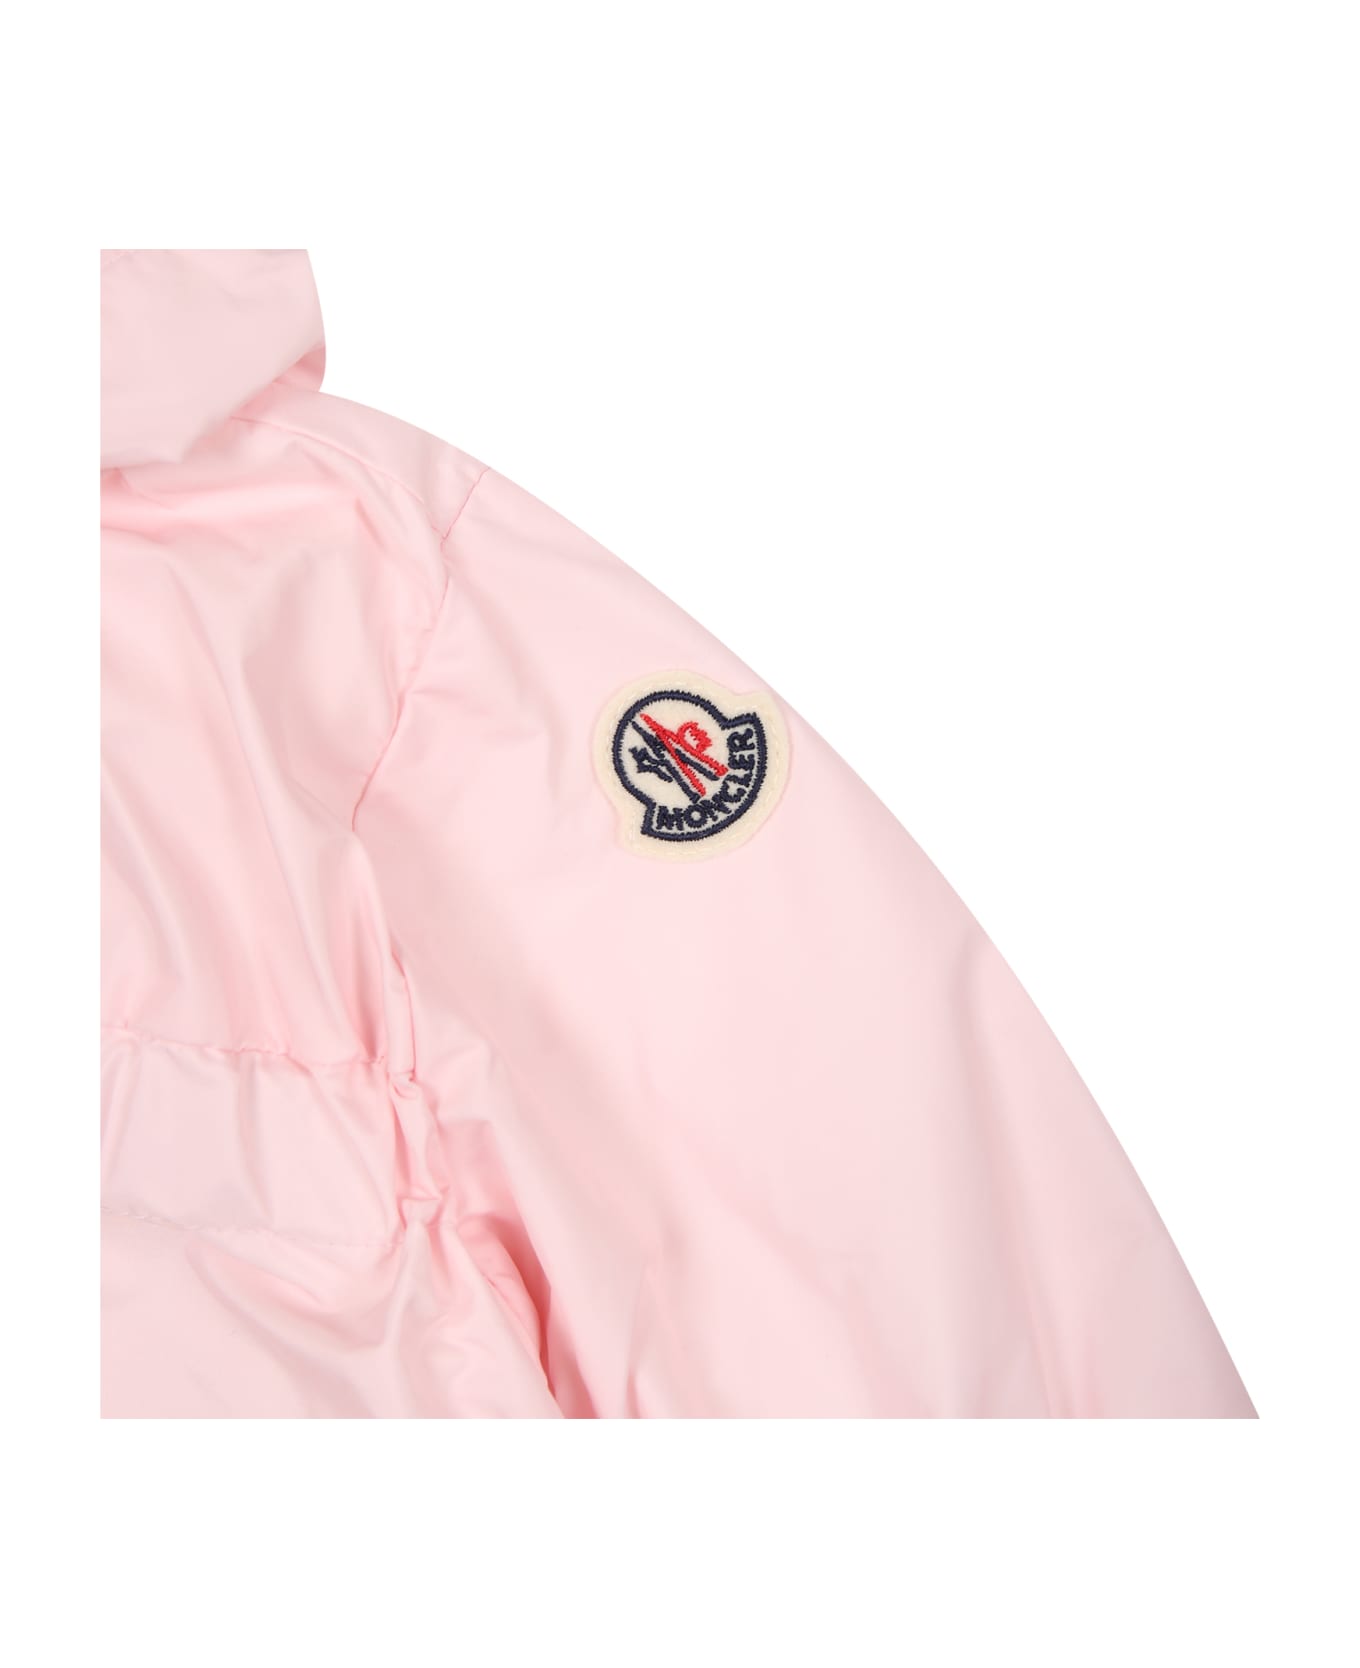 Moncler Windbreaker For Baby Girl With Logo - Pink コート＆ジャケット